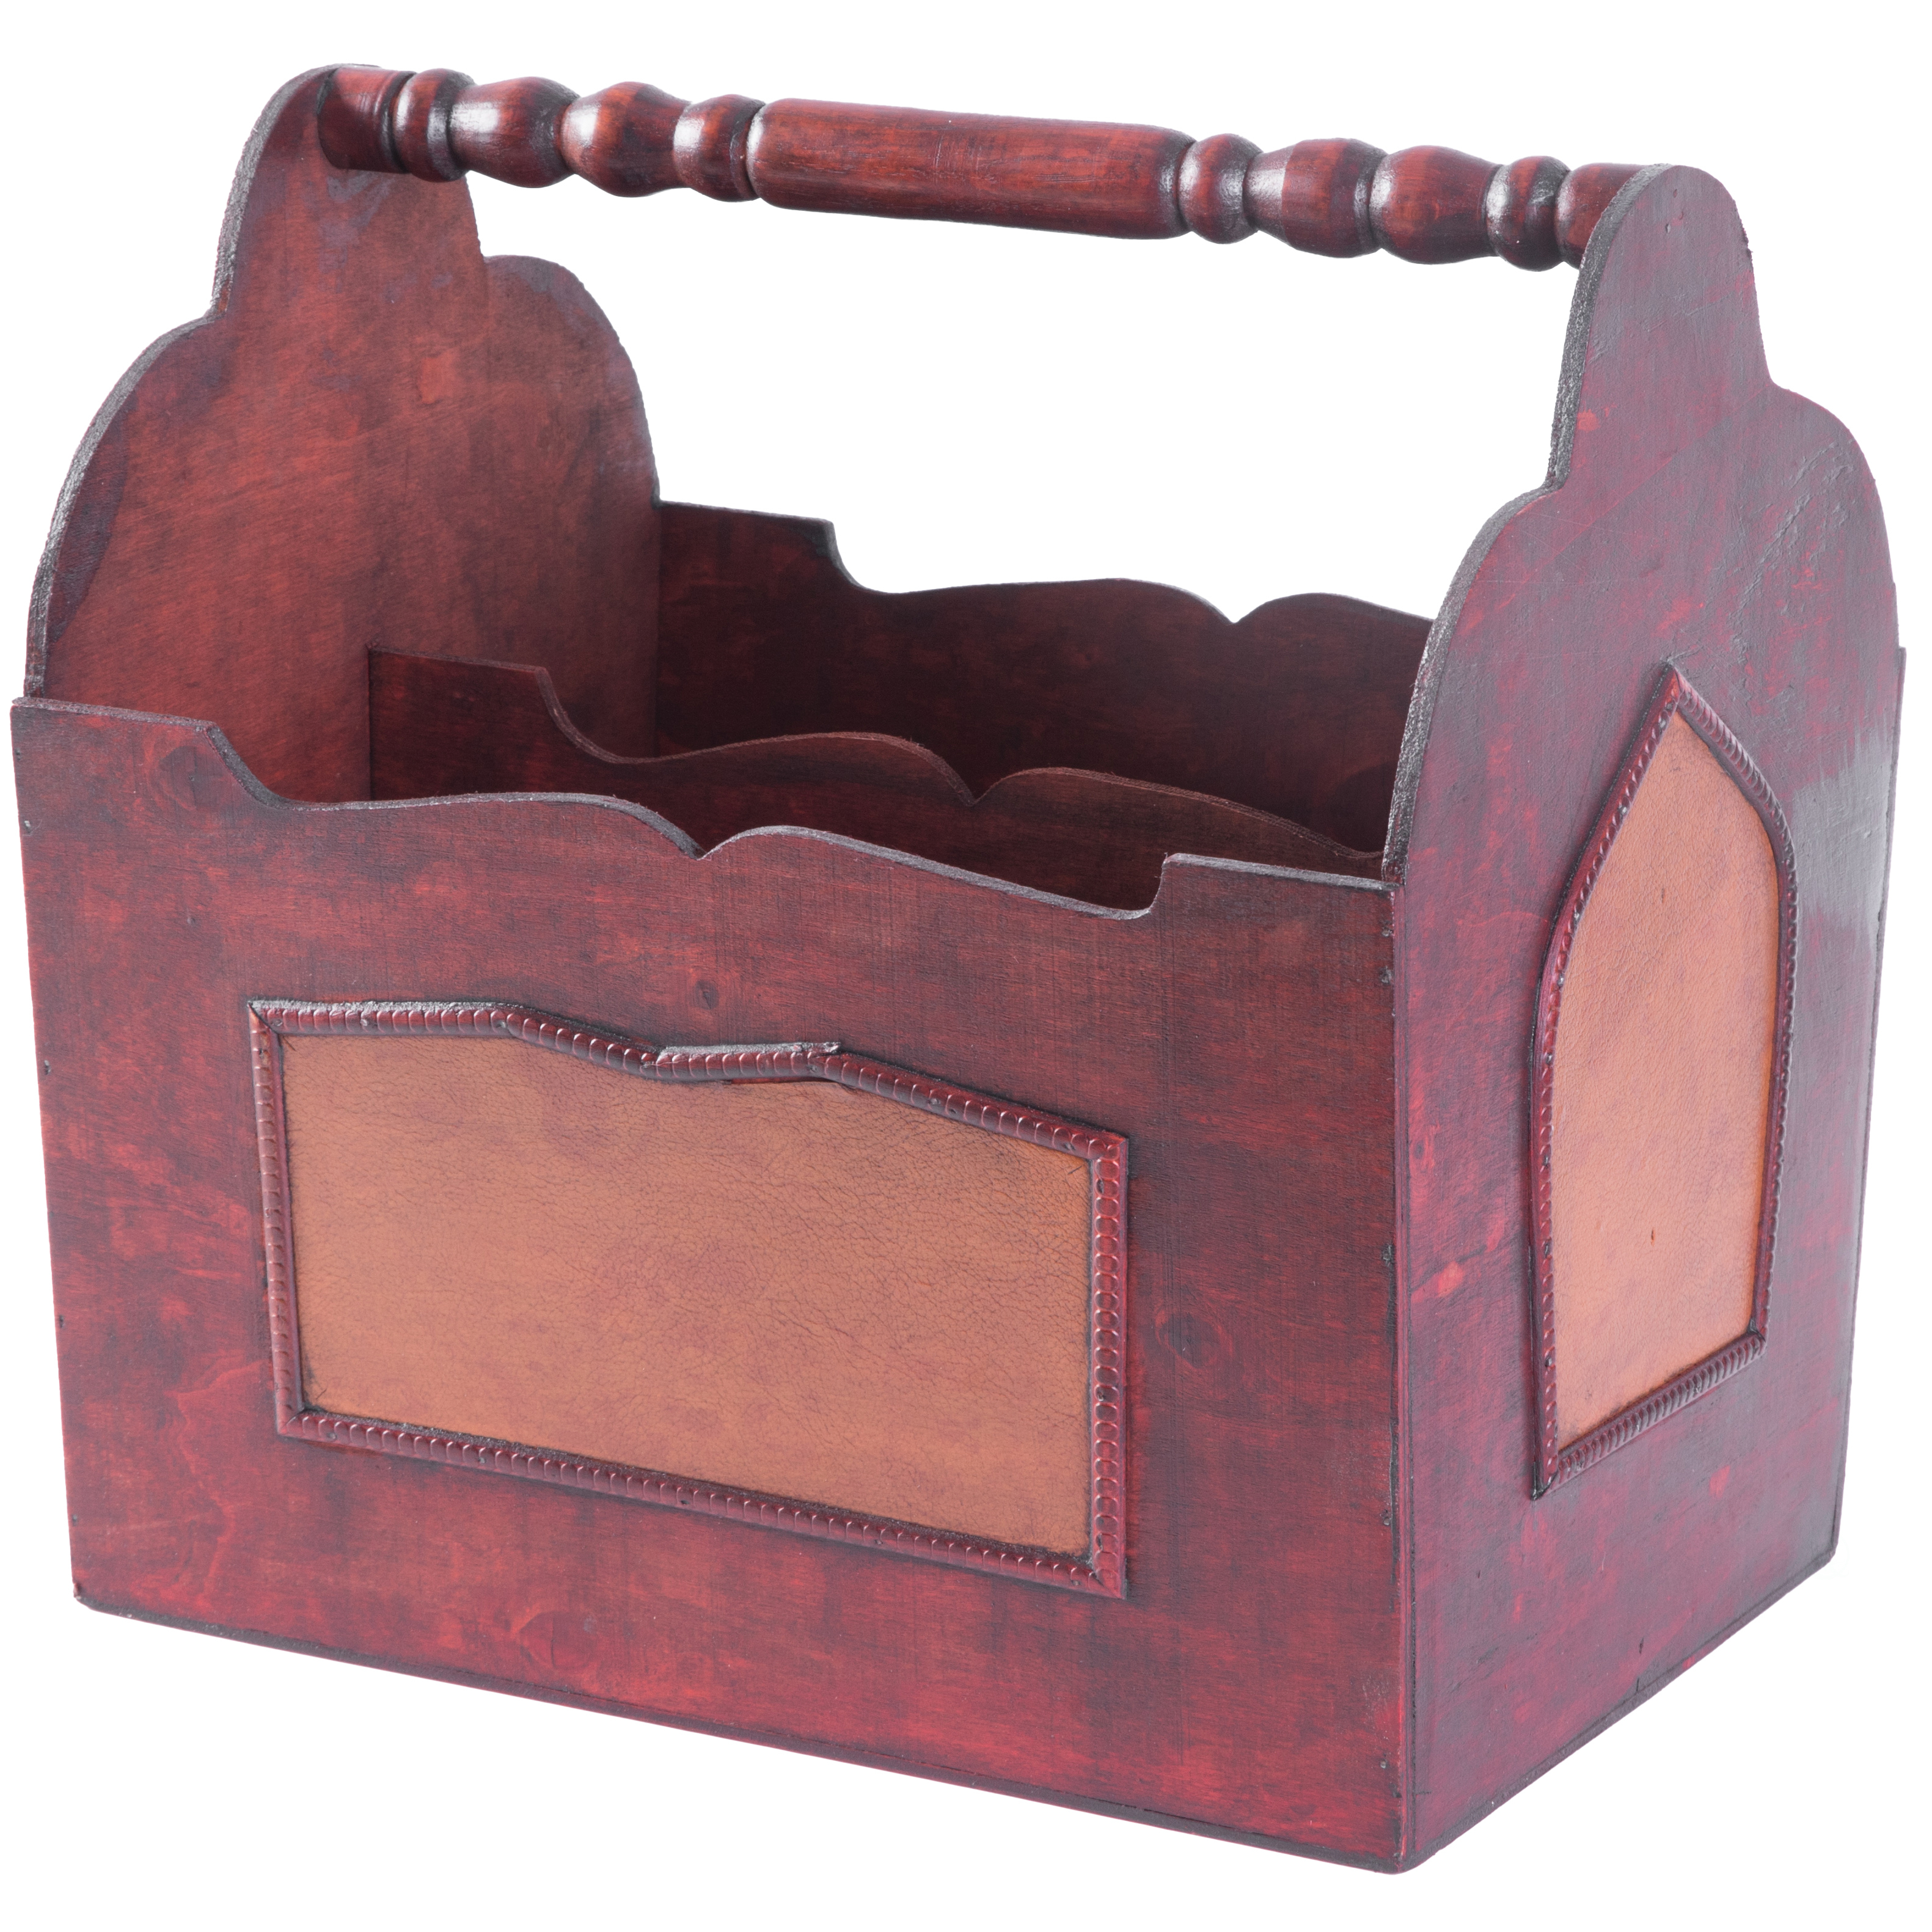 Handcrafted Decorative Wooden Magazine Rack With Handle